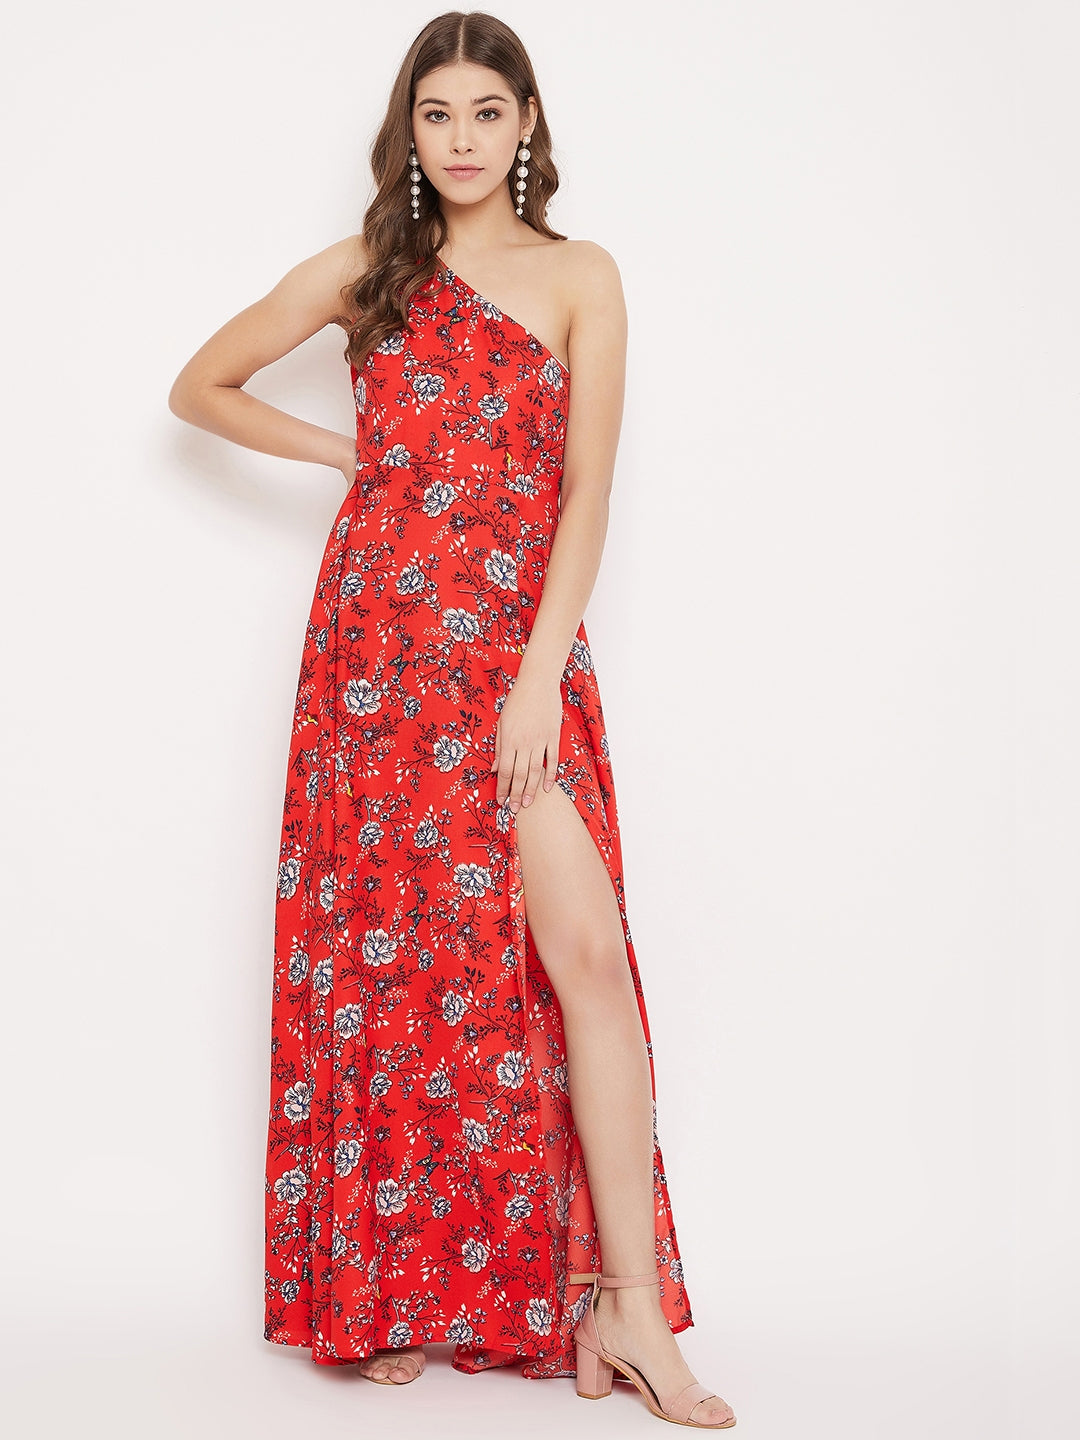 Berrylush Women Red & White Floral Printed One-Shoulder Neck Thigh-High Slit Flared Maxi Dress